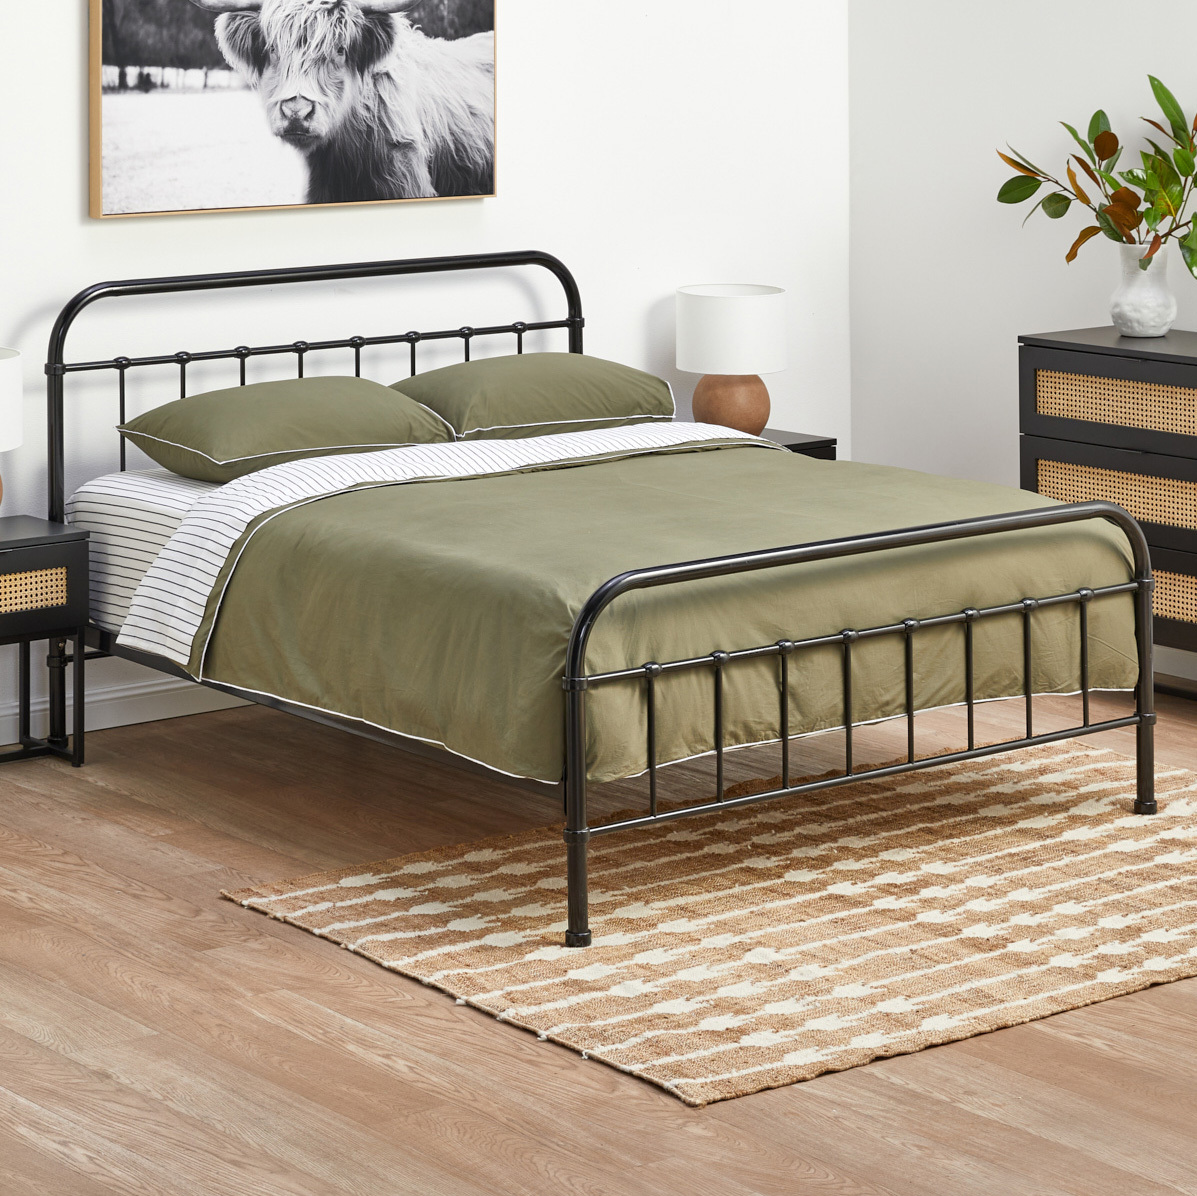 Black Bailey Metal Bed Frame, How To Cover Metal Bed Frame